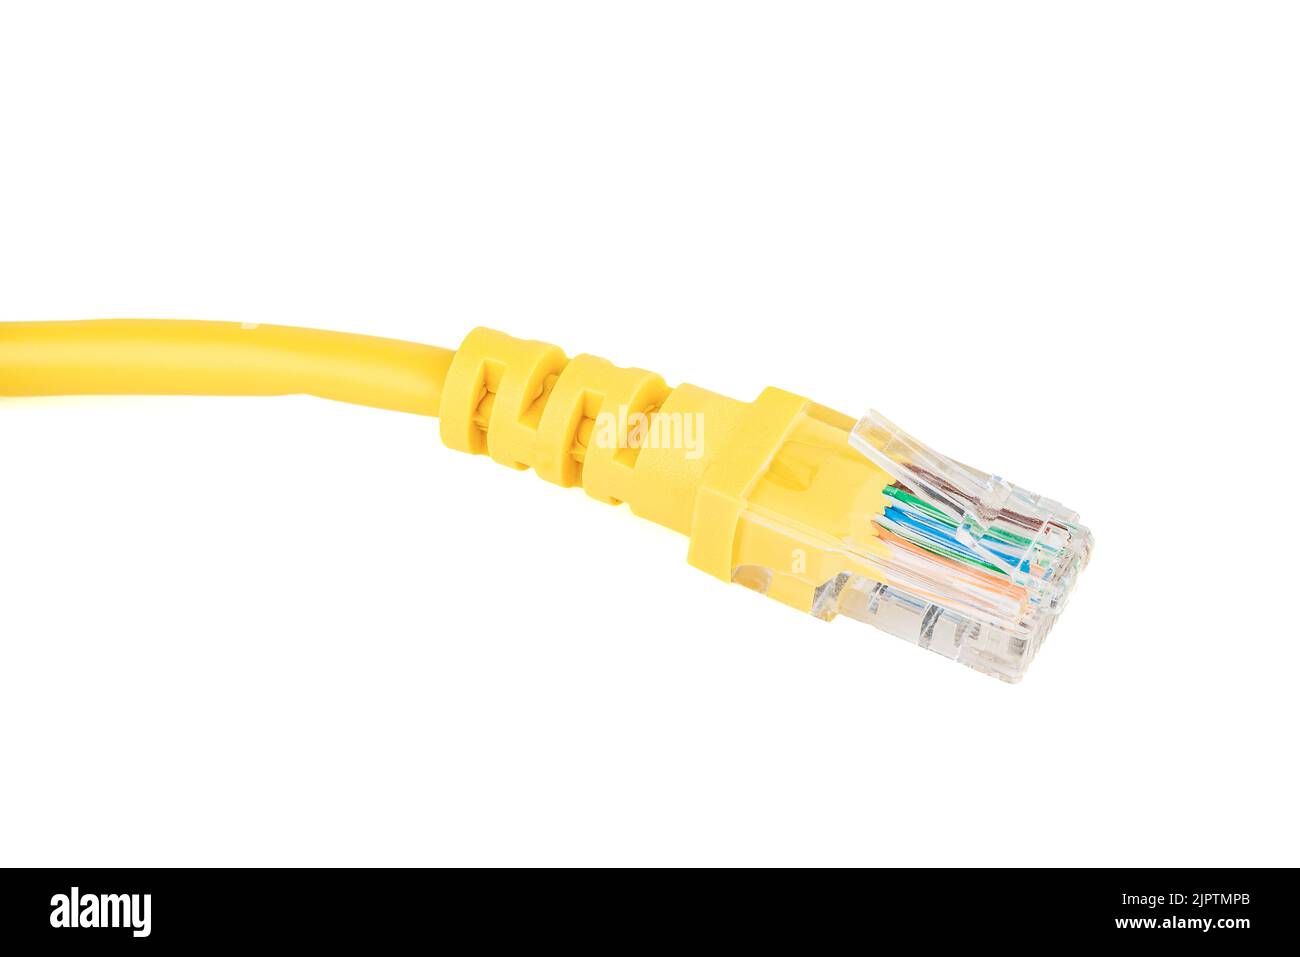 Close-up of the RJ-45 network connection plug of the yellow Ethernet cable of the LAN network connection. White background, copy space. Stock Photo